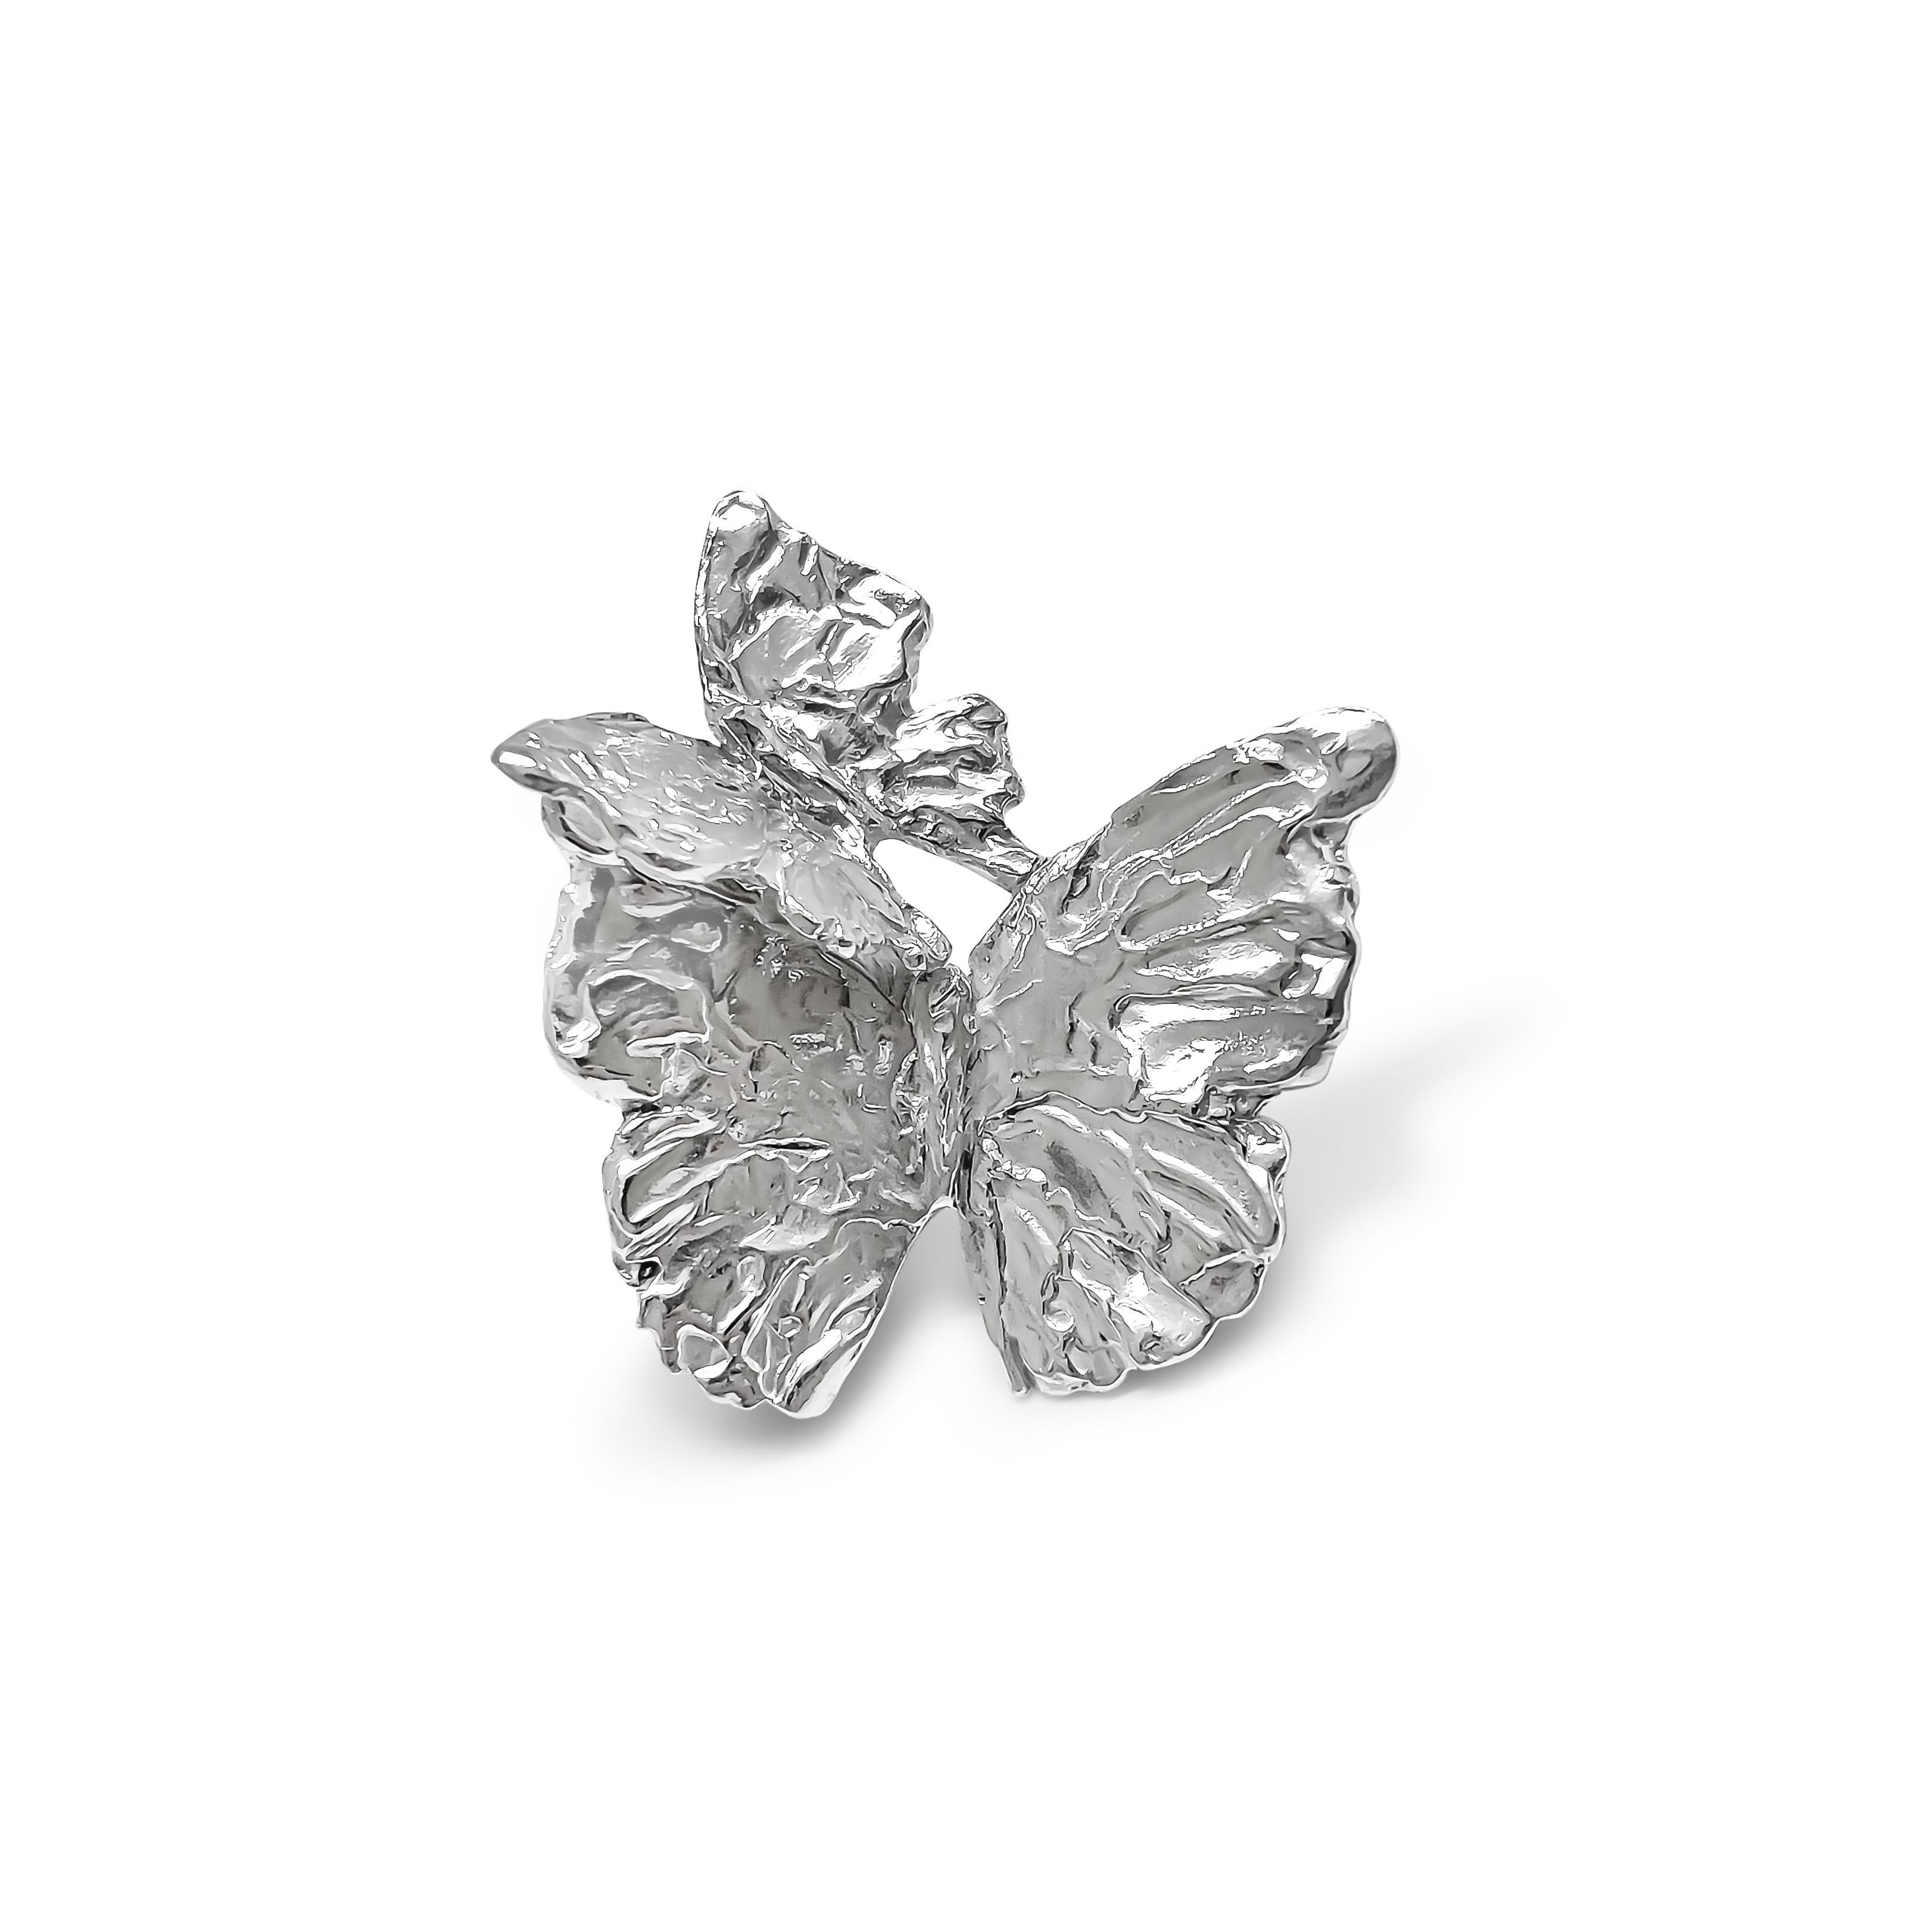 Intention: Double the Impact

Design: Medium and small butterflies perch gently on the ear, a reminder for balance and grace, while doubling down on the BELIEVE collection's message of self actualization.

Style Suggestions: Pair with the Butterfly